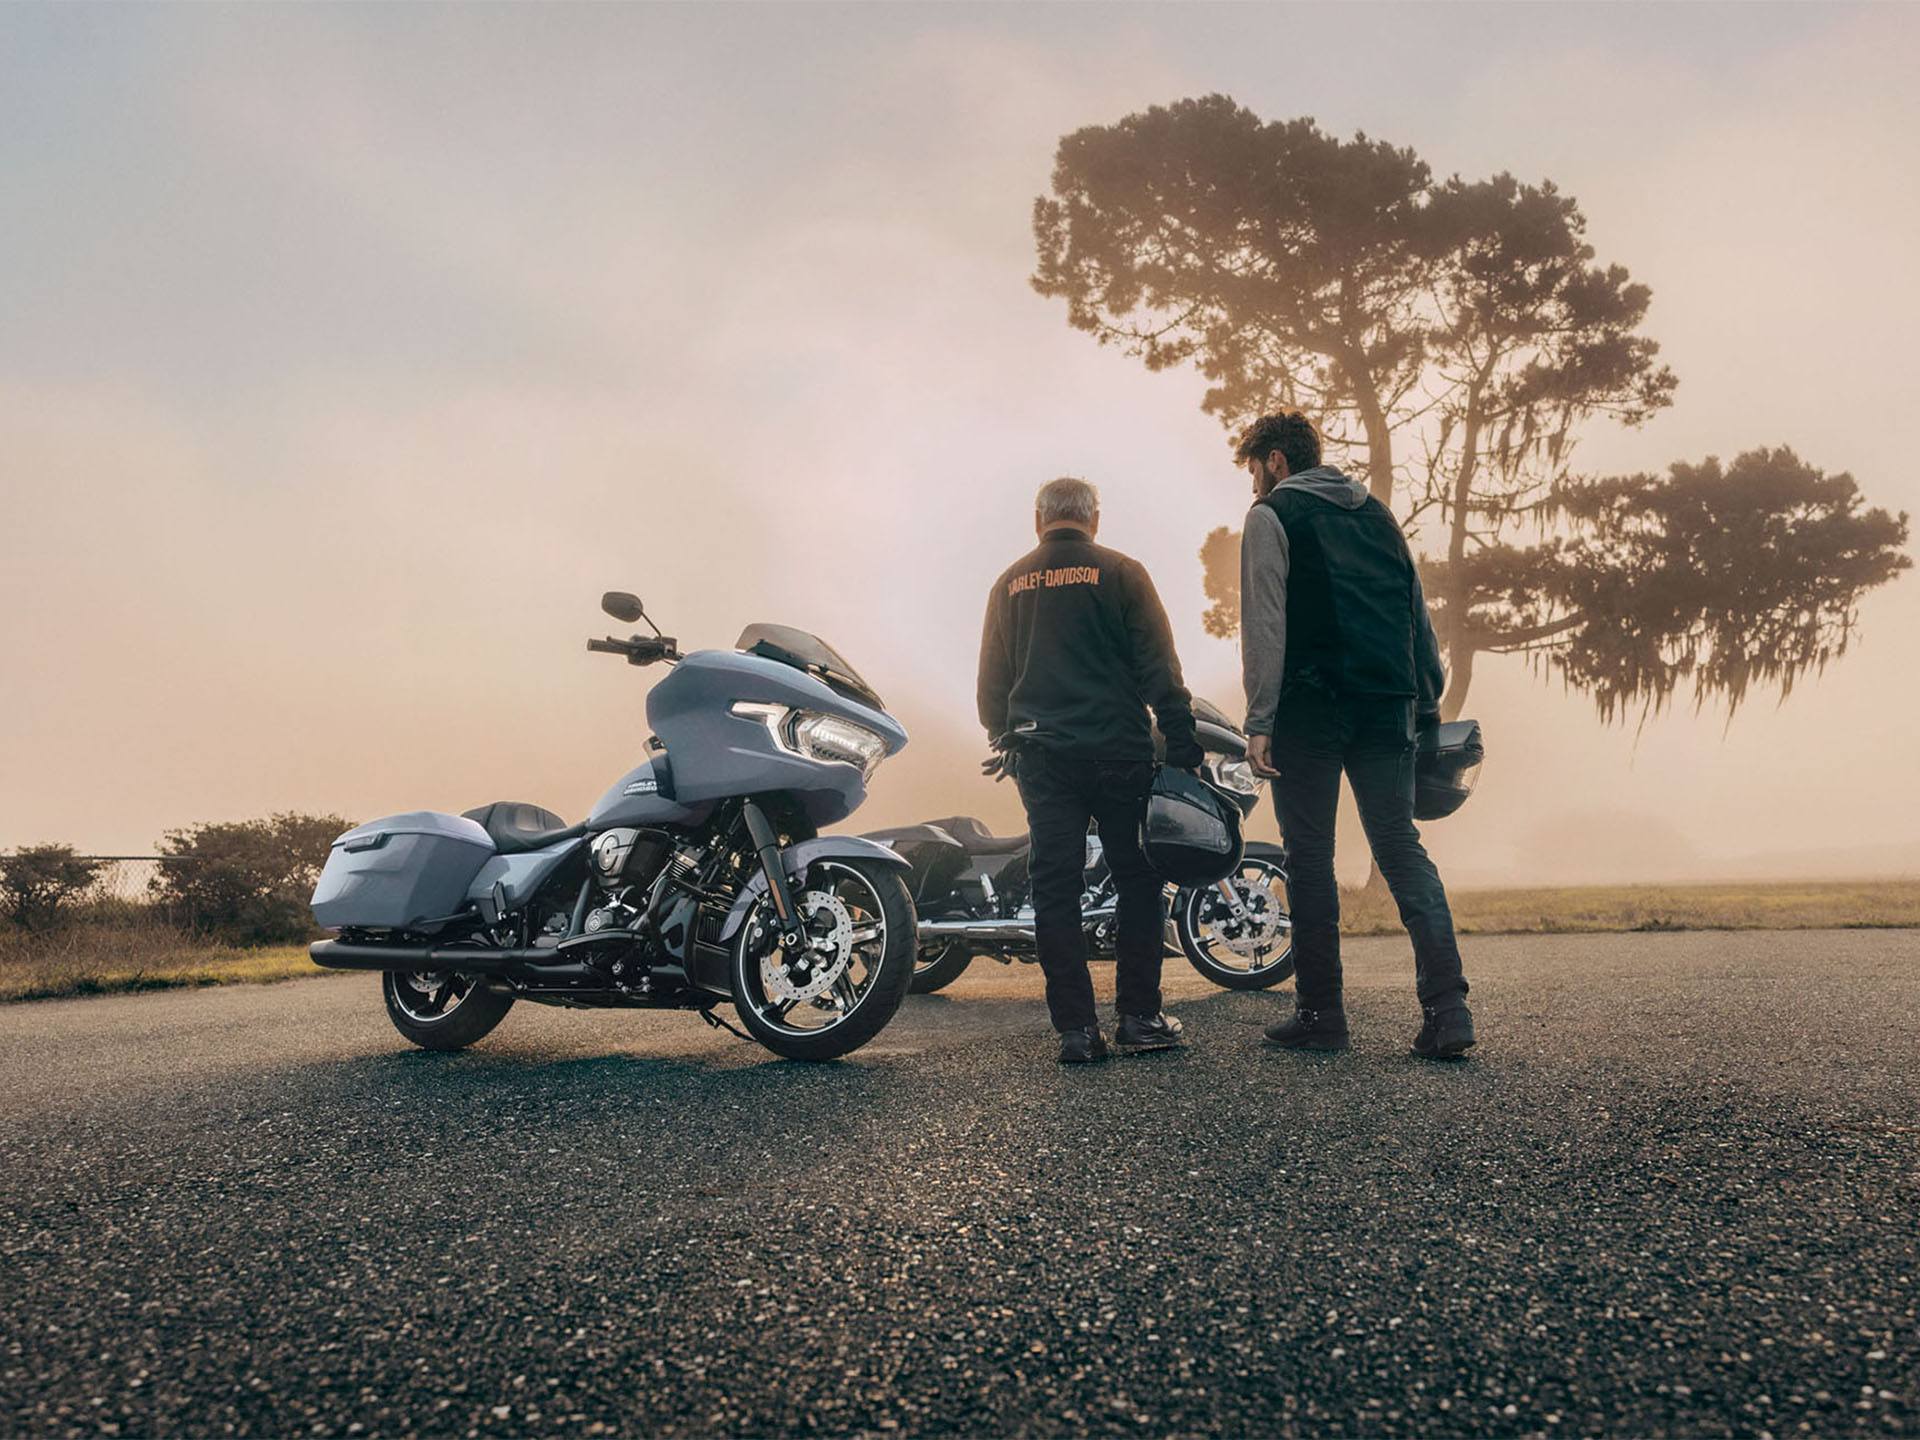 2024 Harley-Davidson Road Glide® in New London, Connecticut - Photo 12